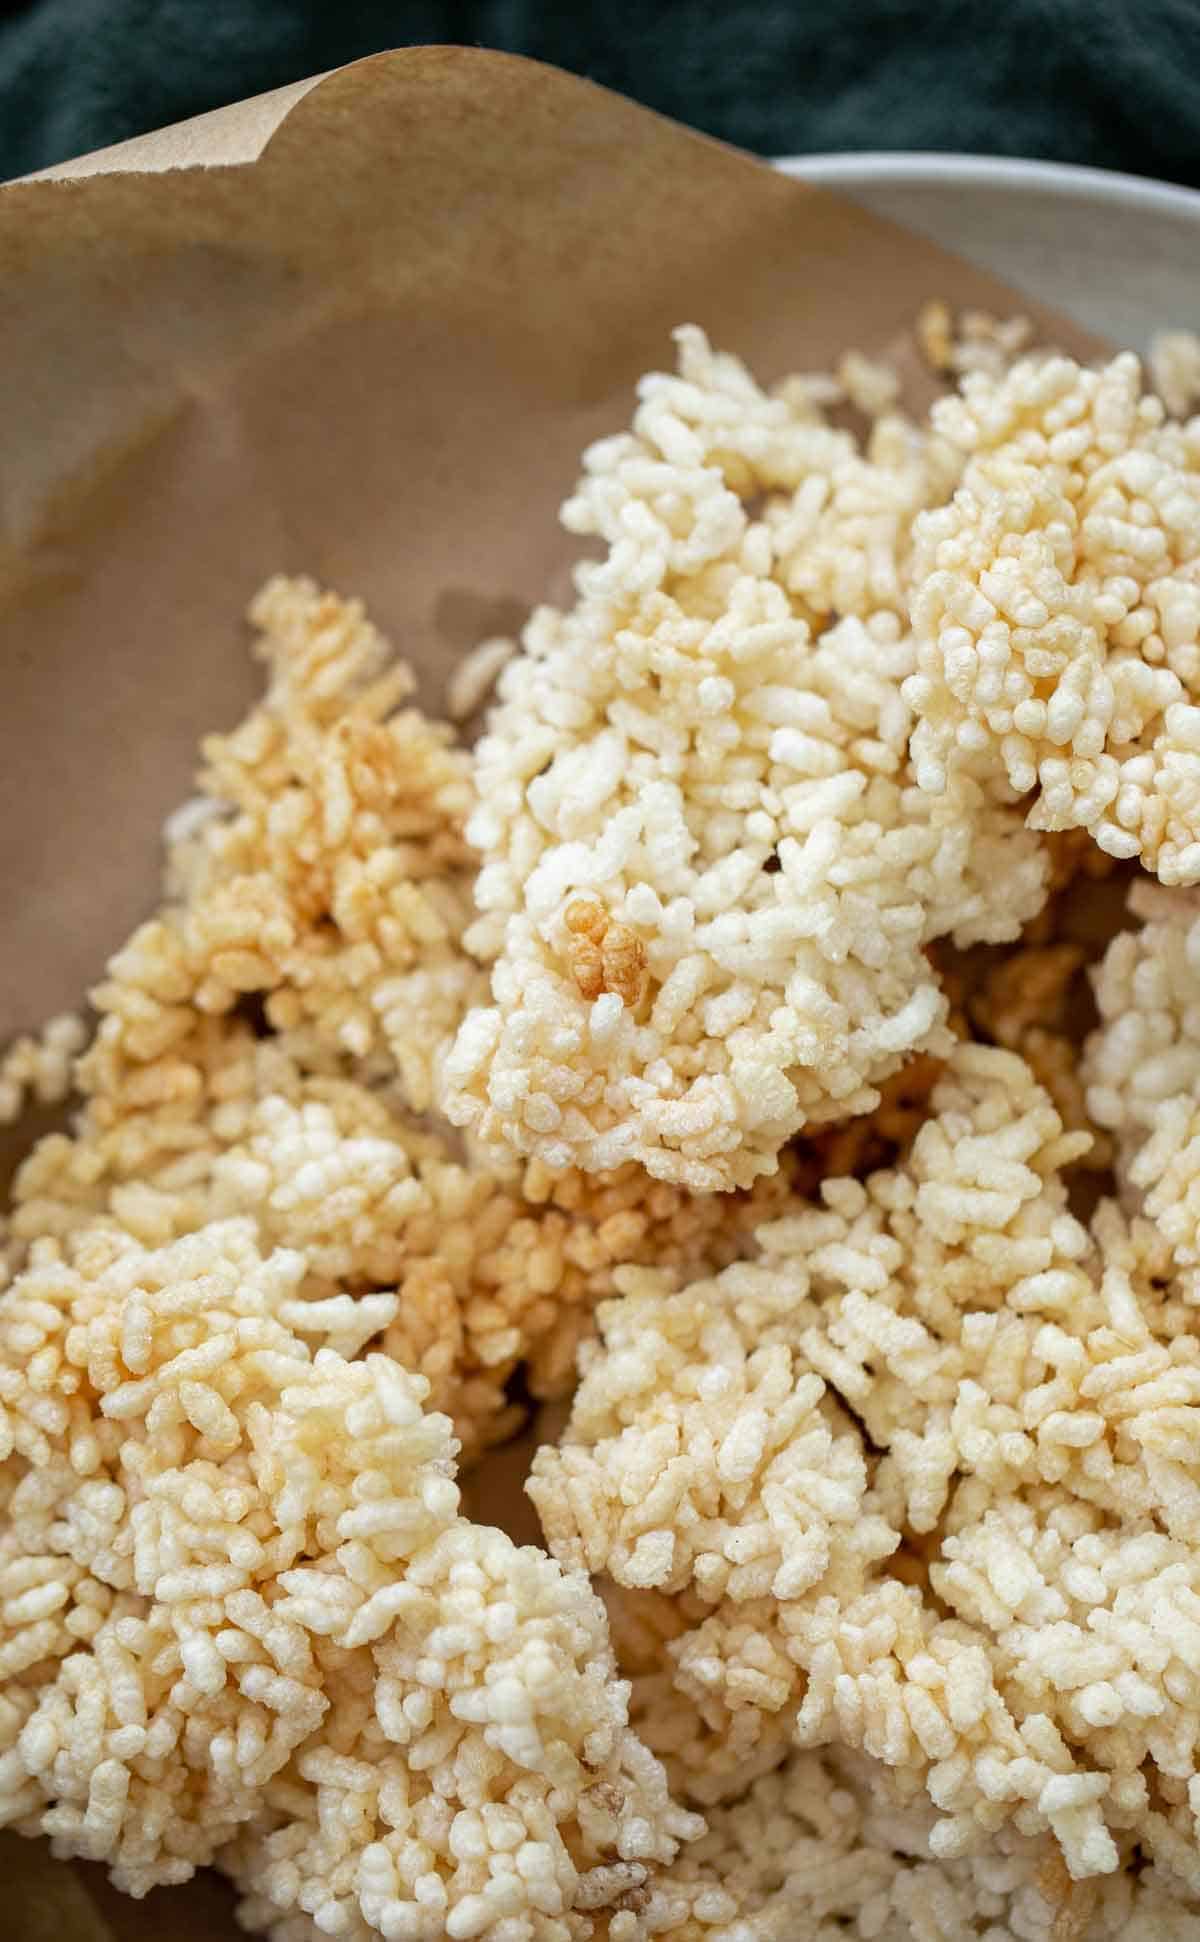 Puffed squares of rice for sizzling rice soup.